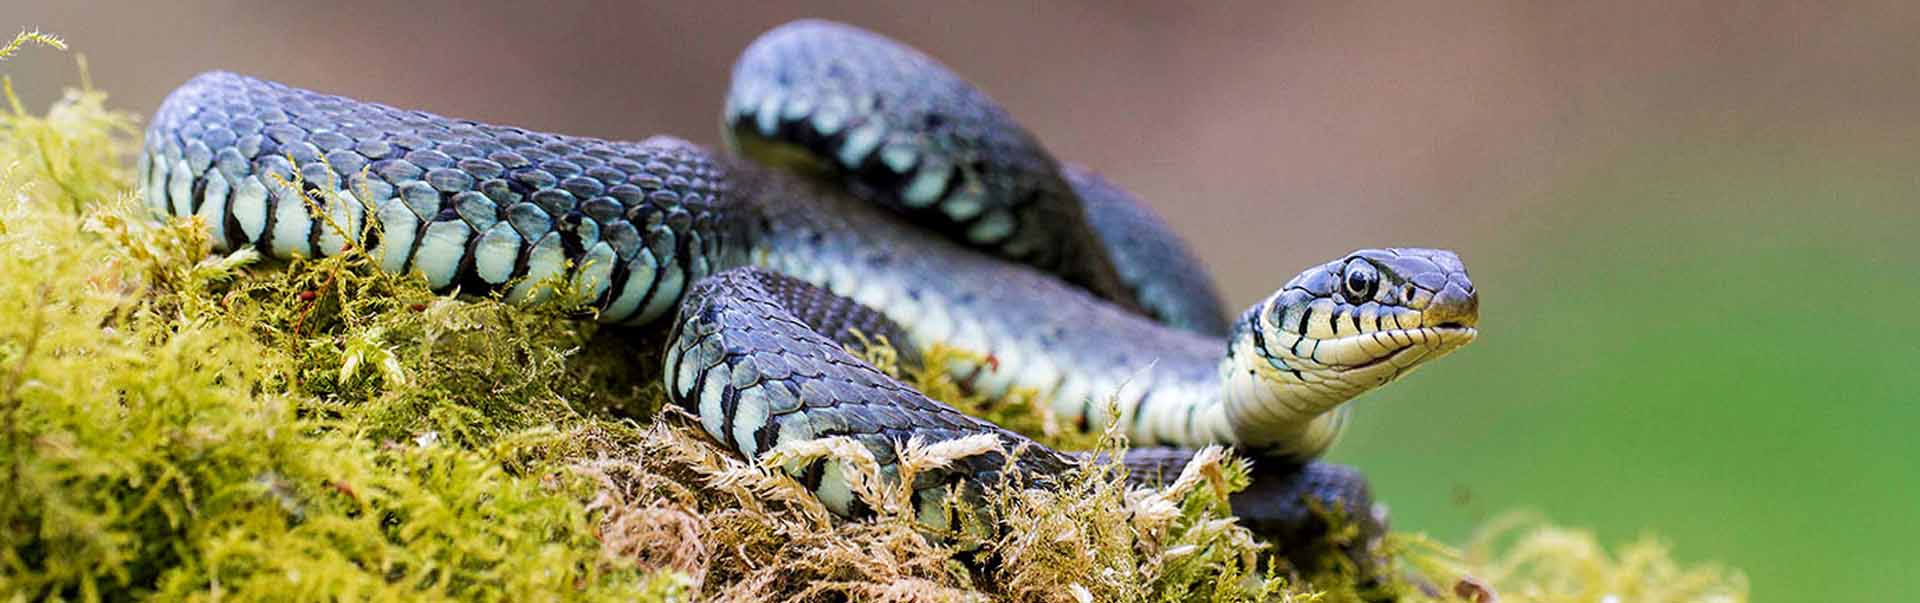 The Grass Snake of Cyprus